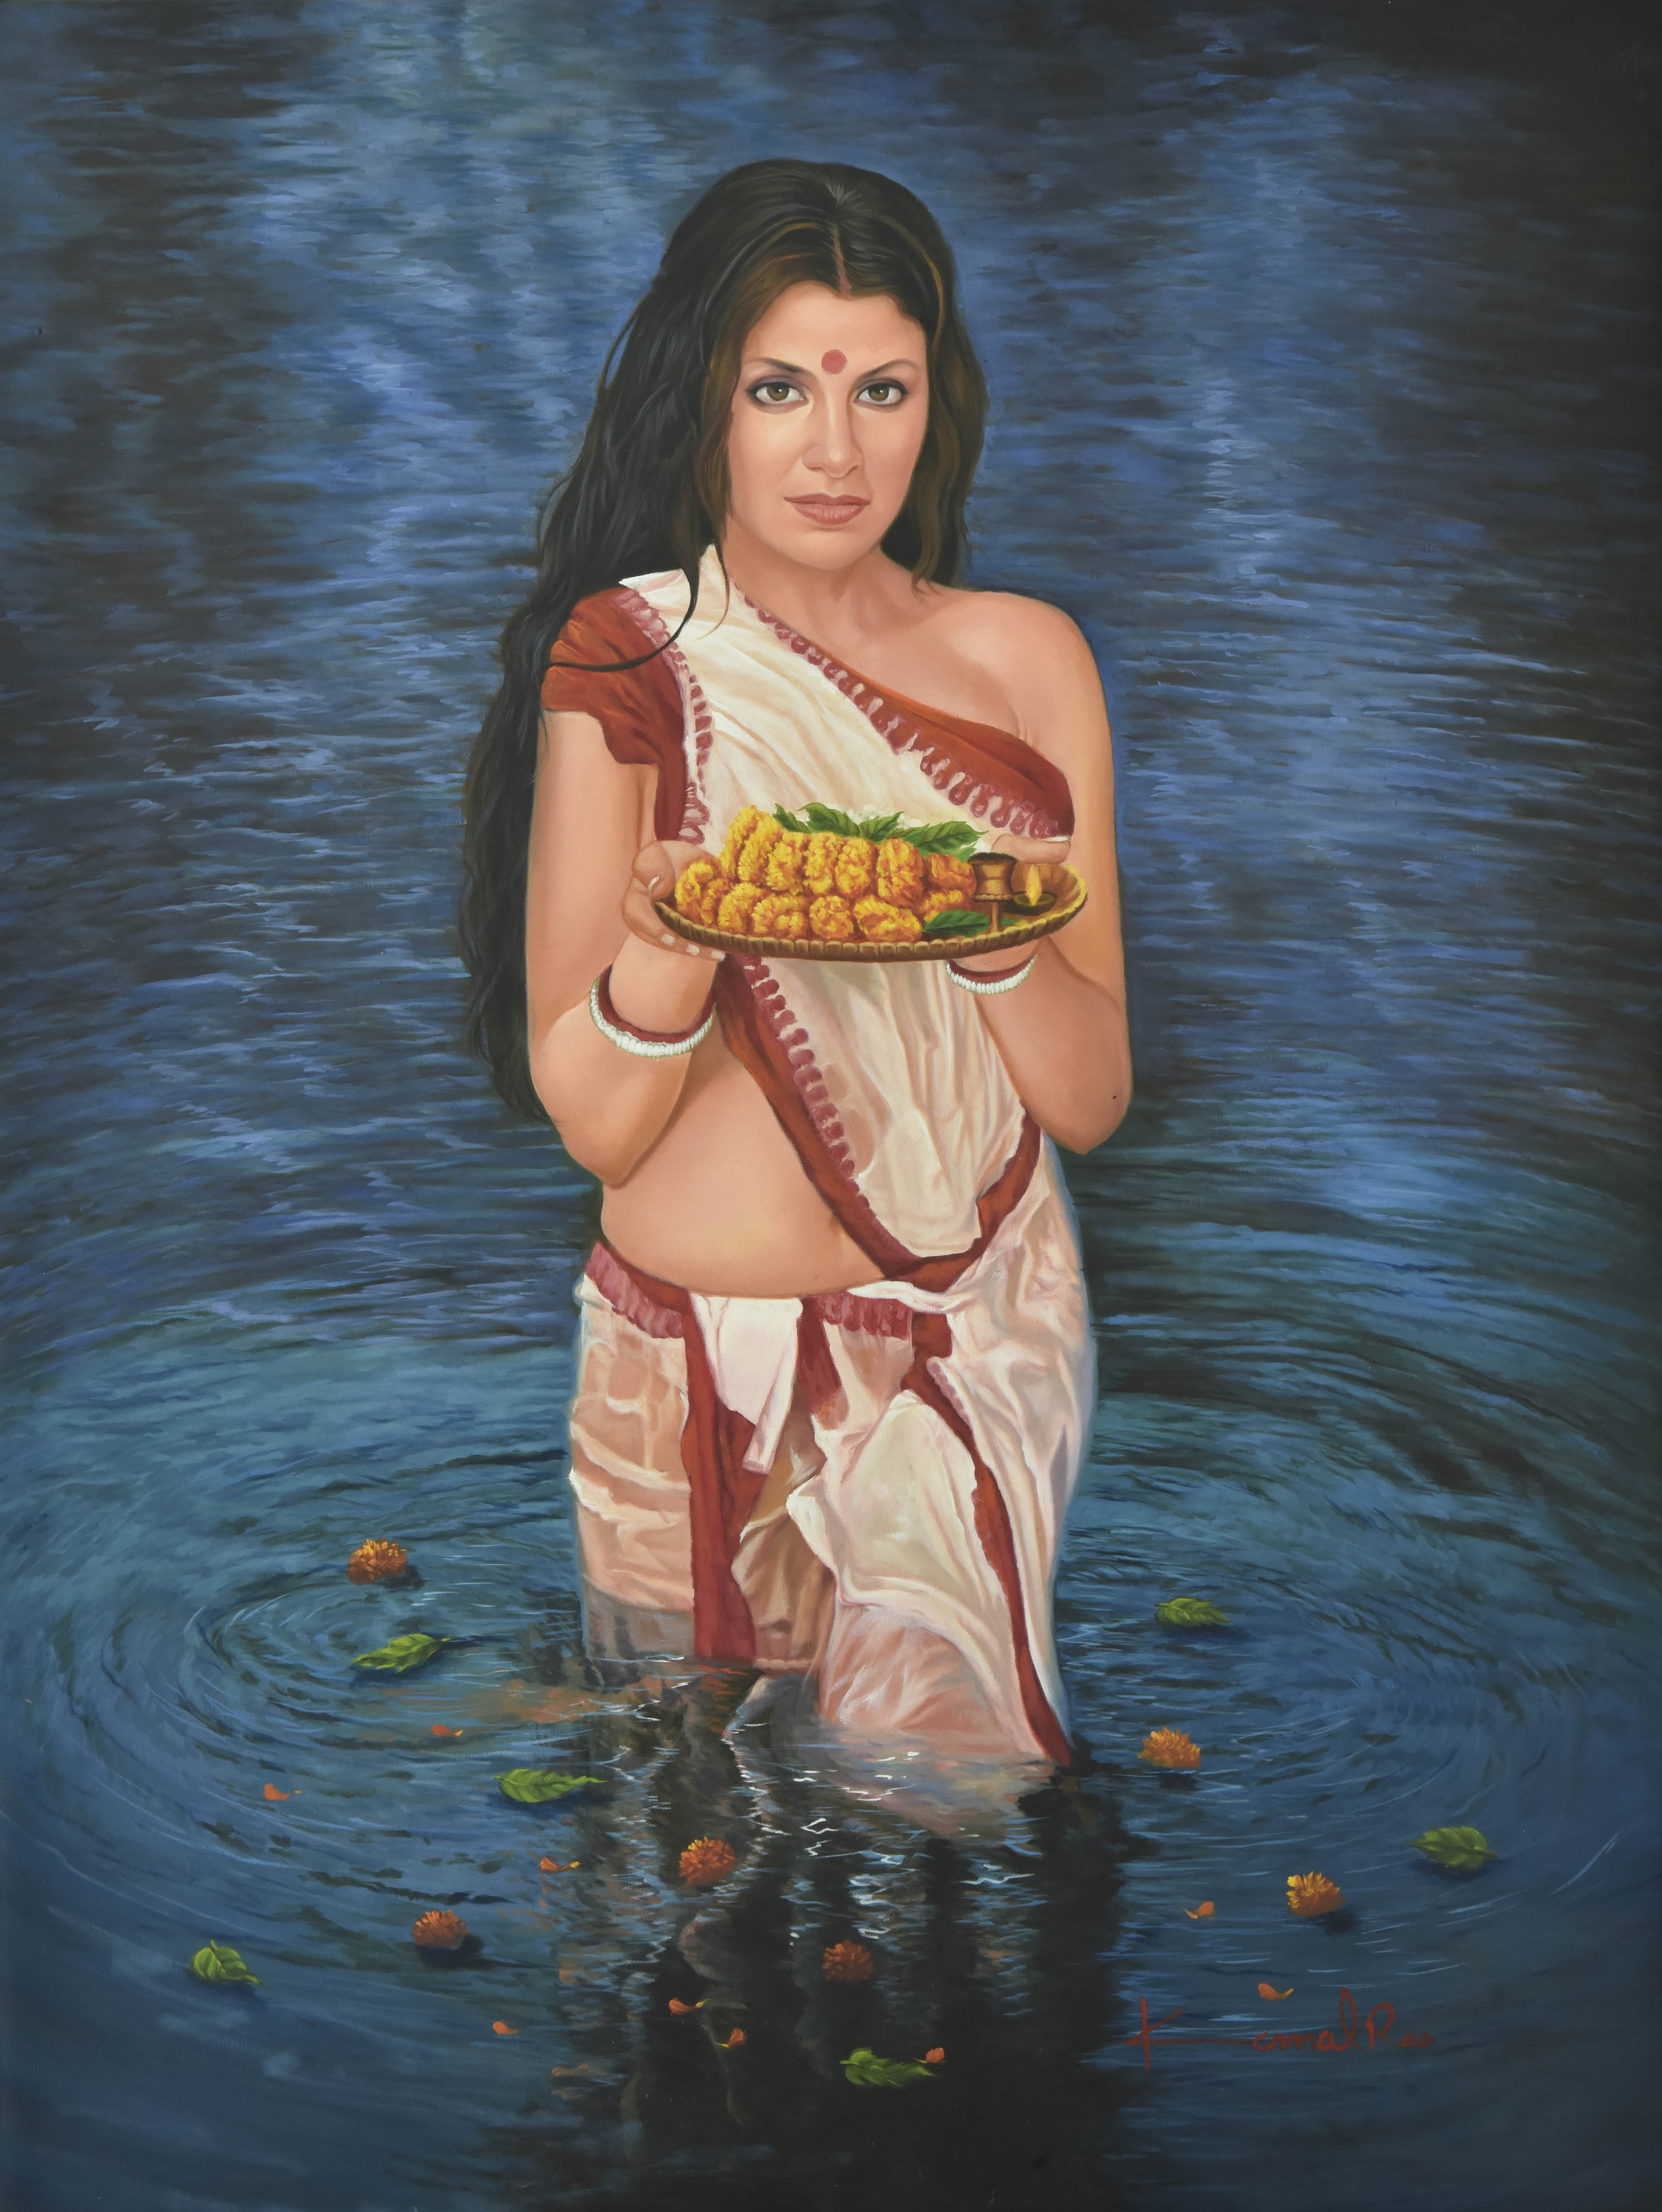 Lady in the River